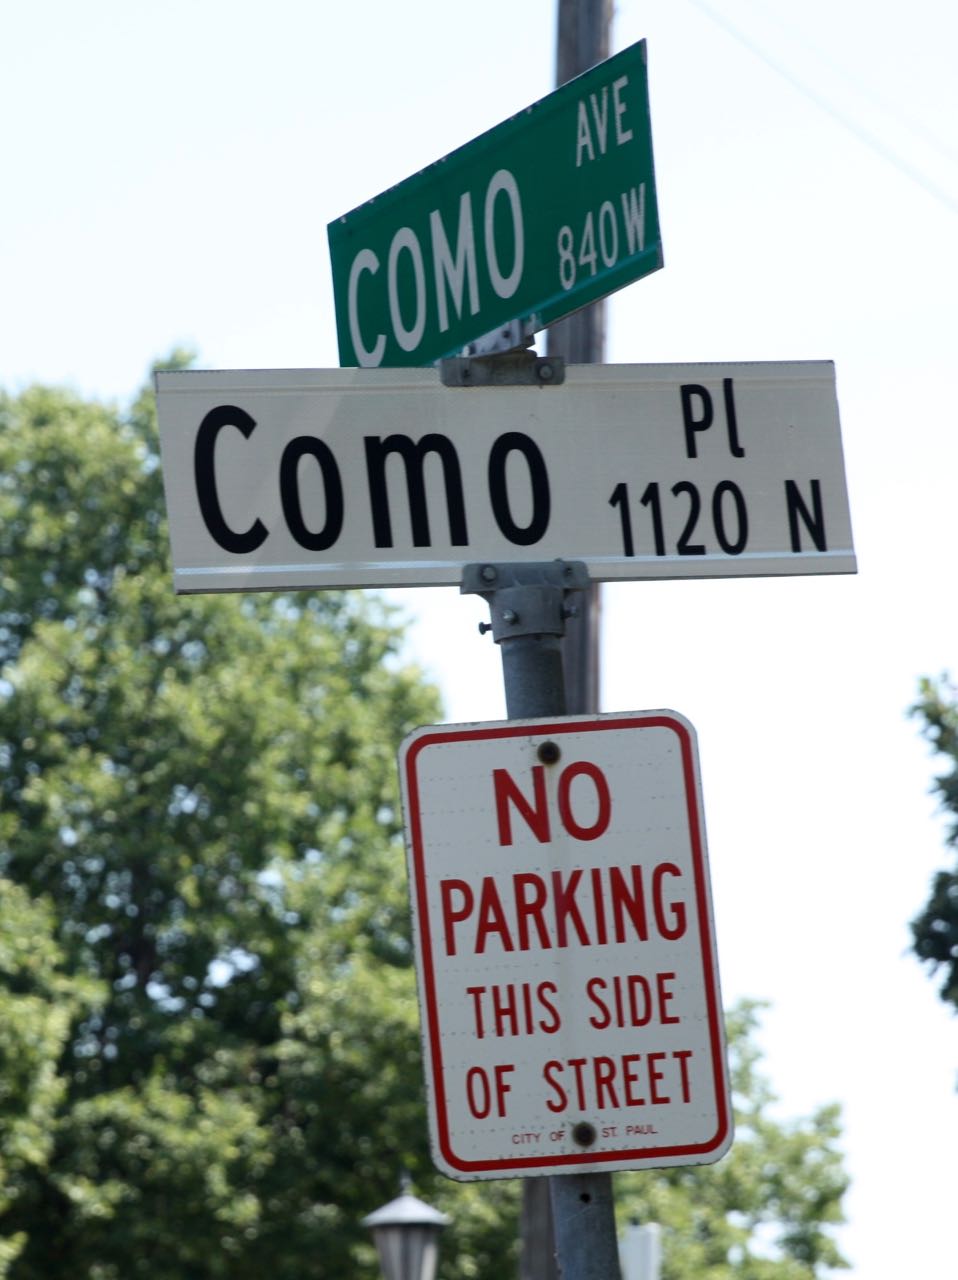 The Como Place sign is the only street sign with black letters and white background I've seen in Saint Paul that is not in honor of a person or place.